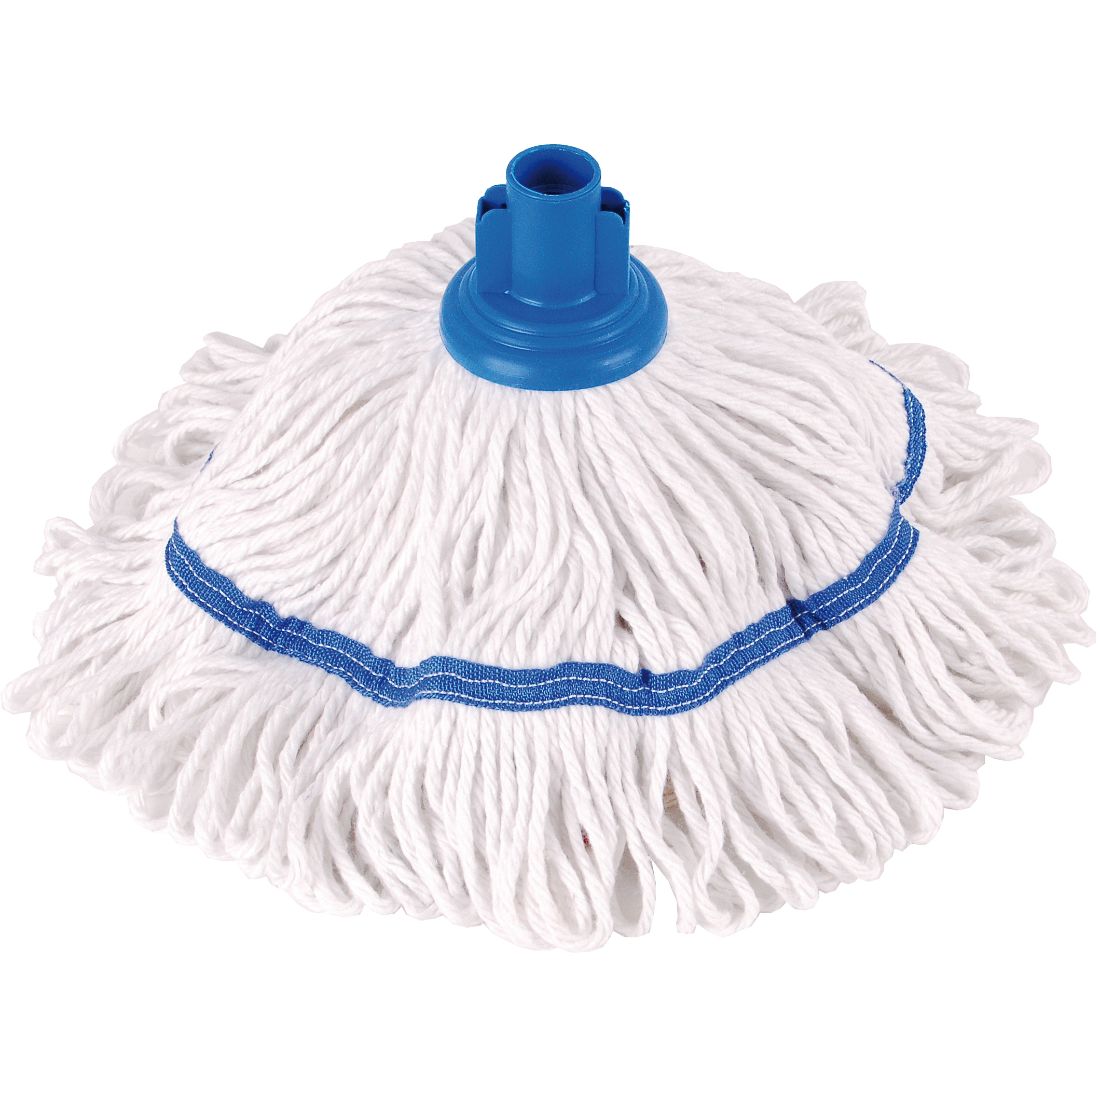 Colour Coded Mop Head Hygienic Cleaning Yarn Cotton Mop Socket BLUE Pack of 5 